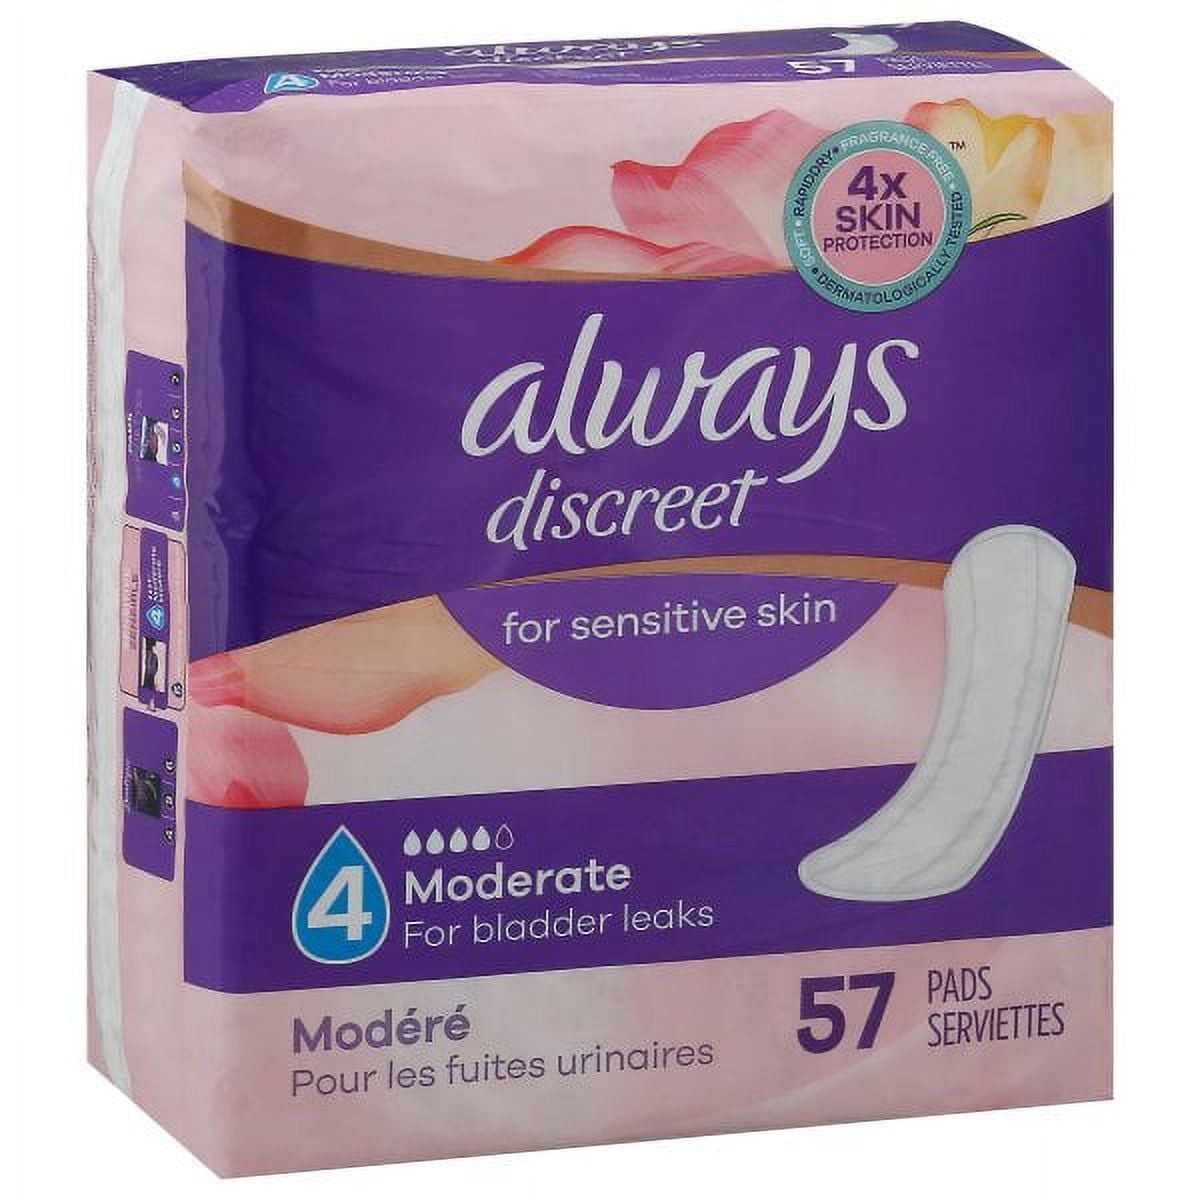 Always Discreet for Sensitive Skin Size 4 Moderate Pads, 57 Count